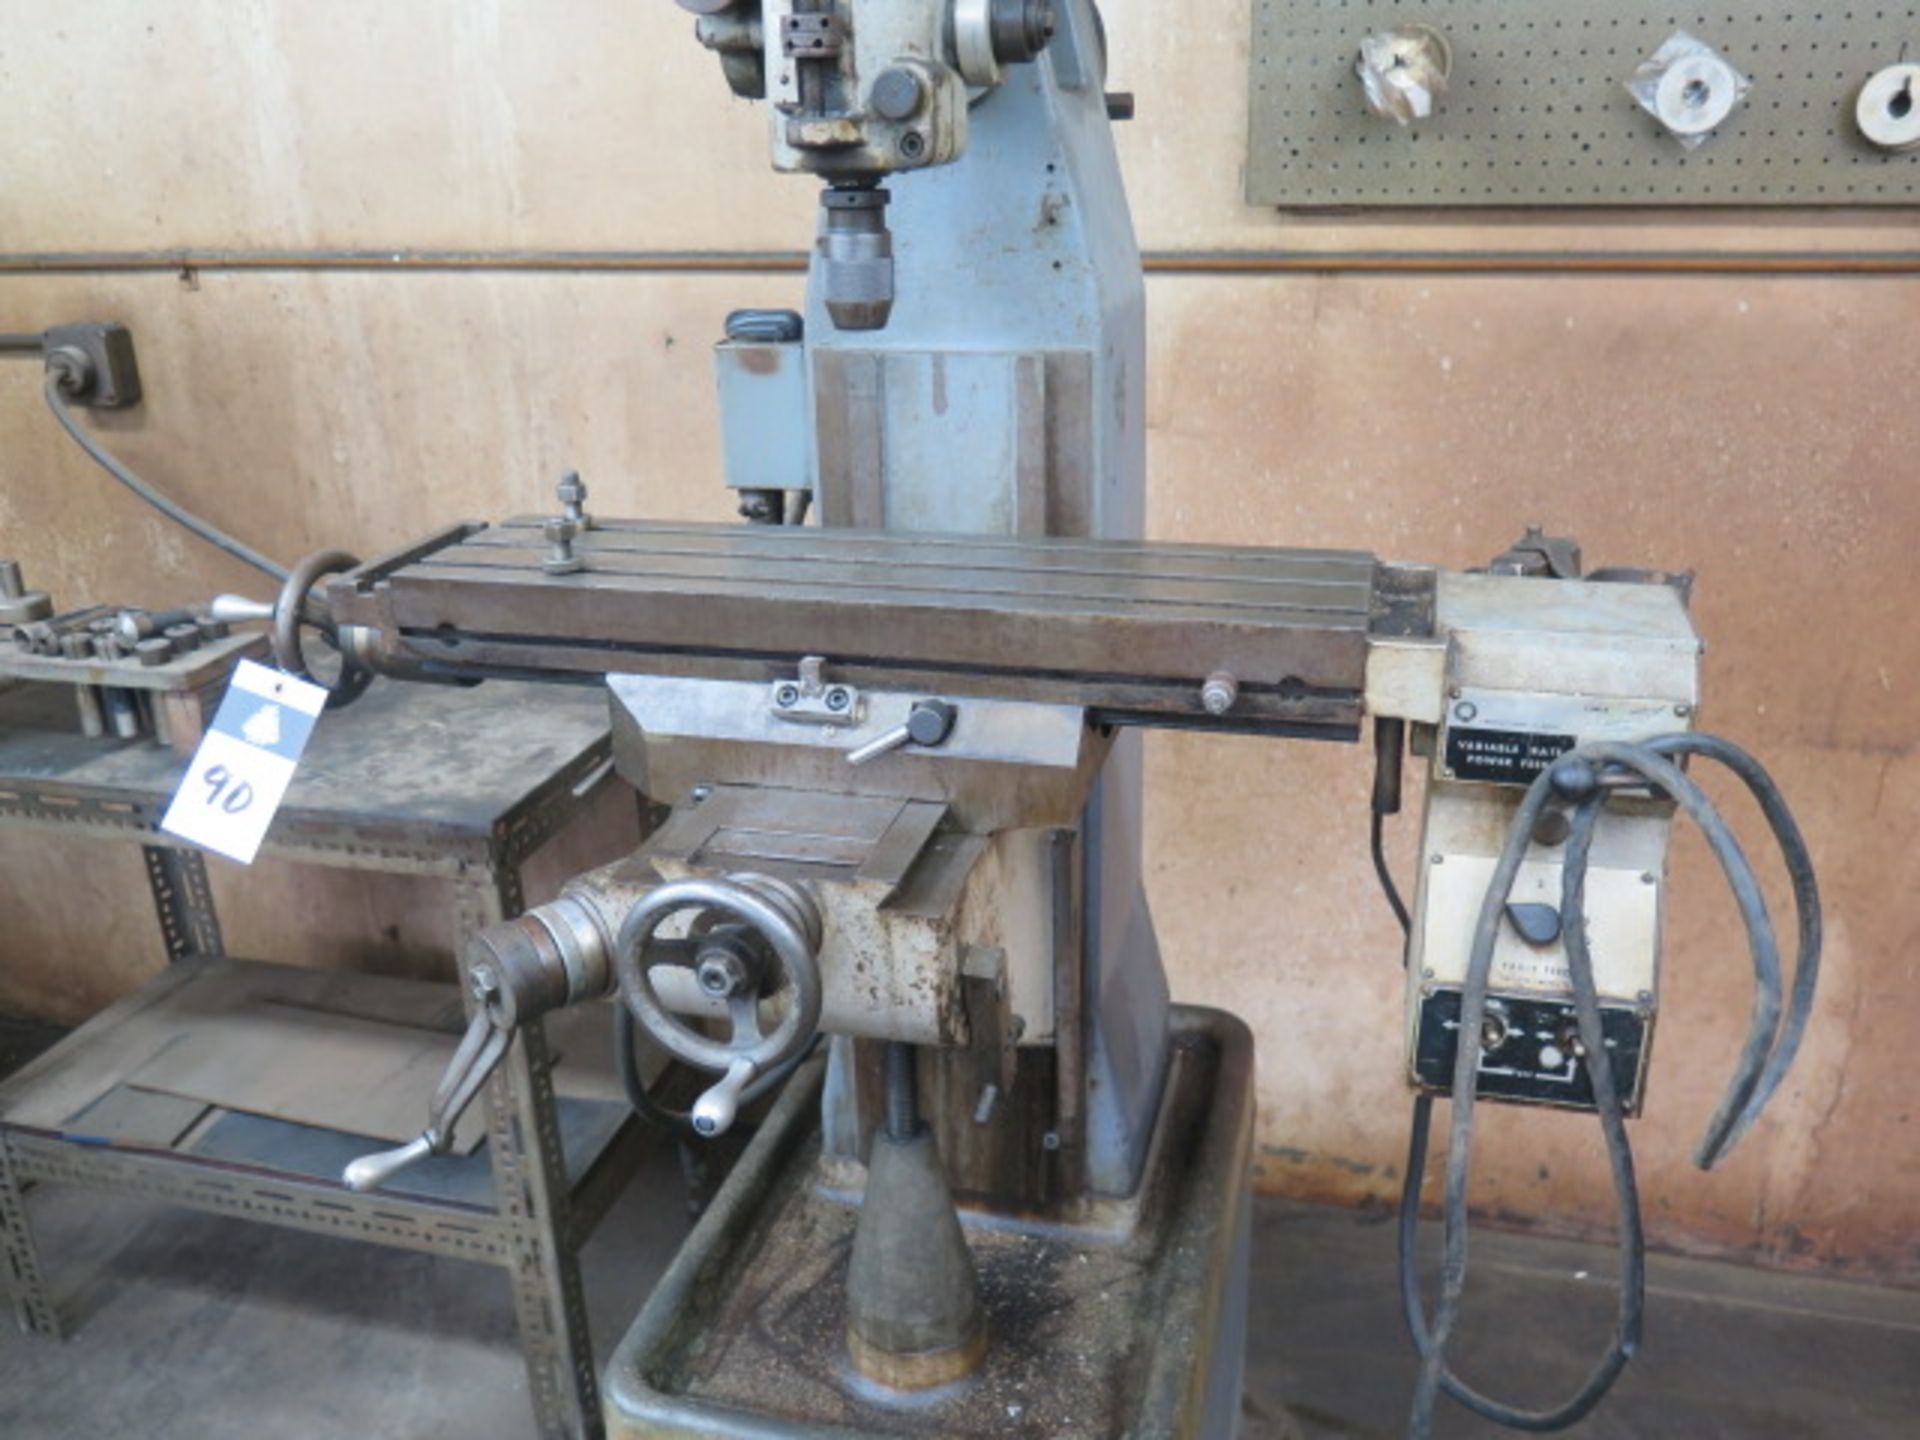 Rockwell Ram Style Vertical Mill w/ 370-6300 RPM, 6-Speeds, R8 Spindle, Power Feed, SOLD AS IS - Image 4 of 10